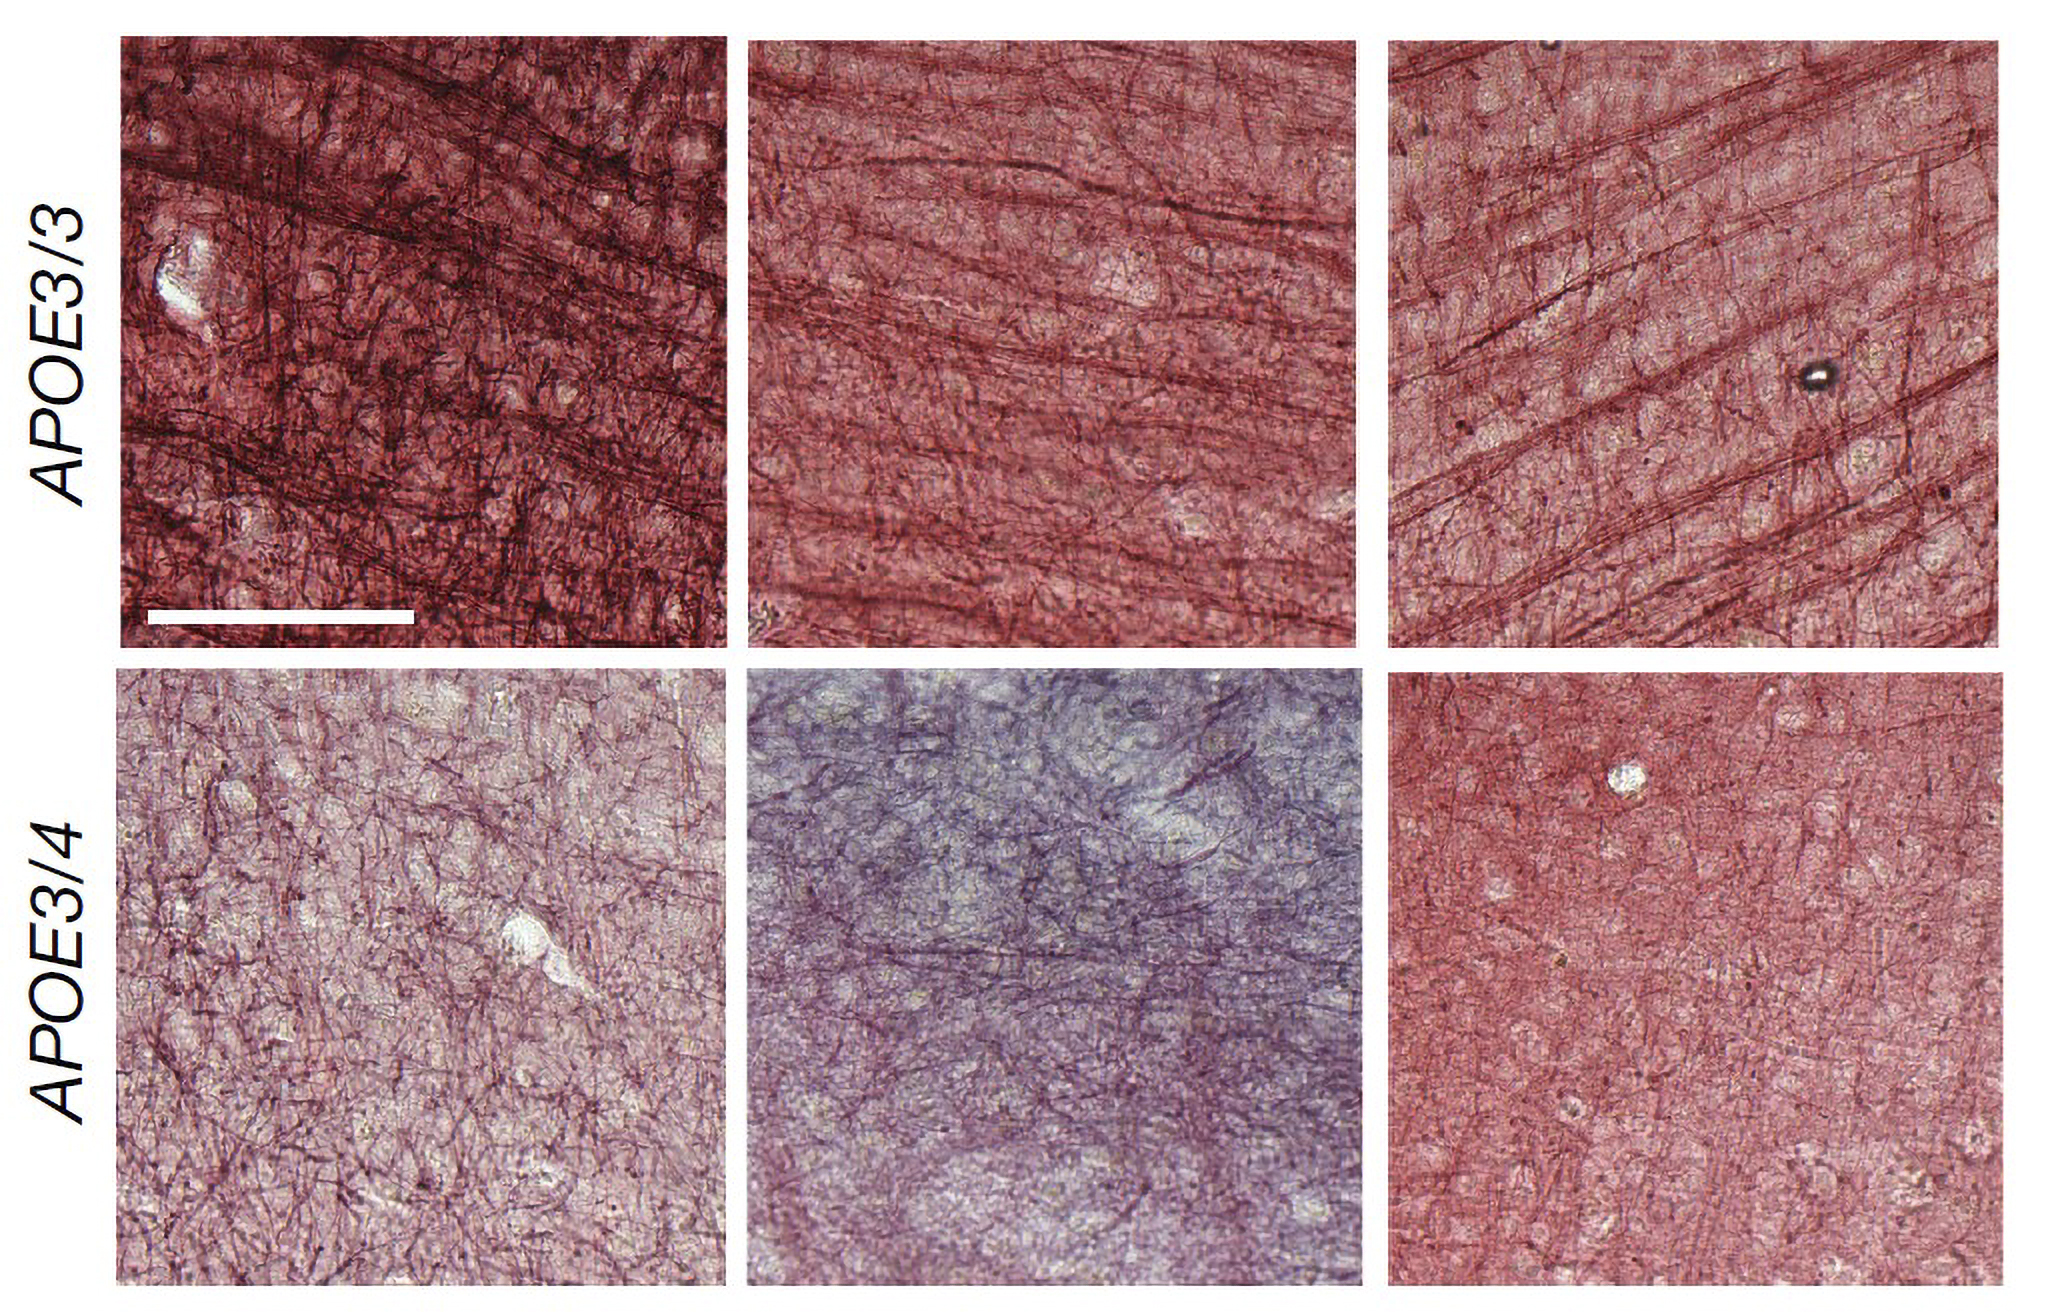 A 3 by 2 array of panels shows a top row of brain tissue squares in which black streaks are very clear. In the bottom row the streaks are less clear.